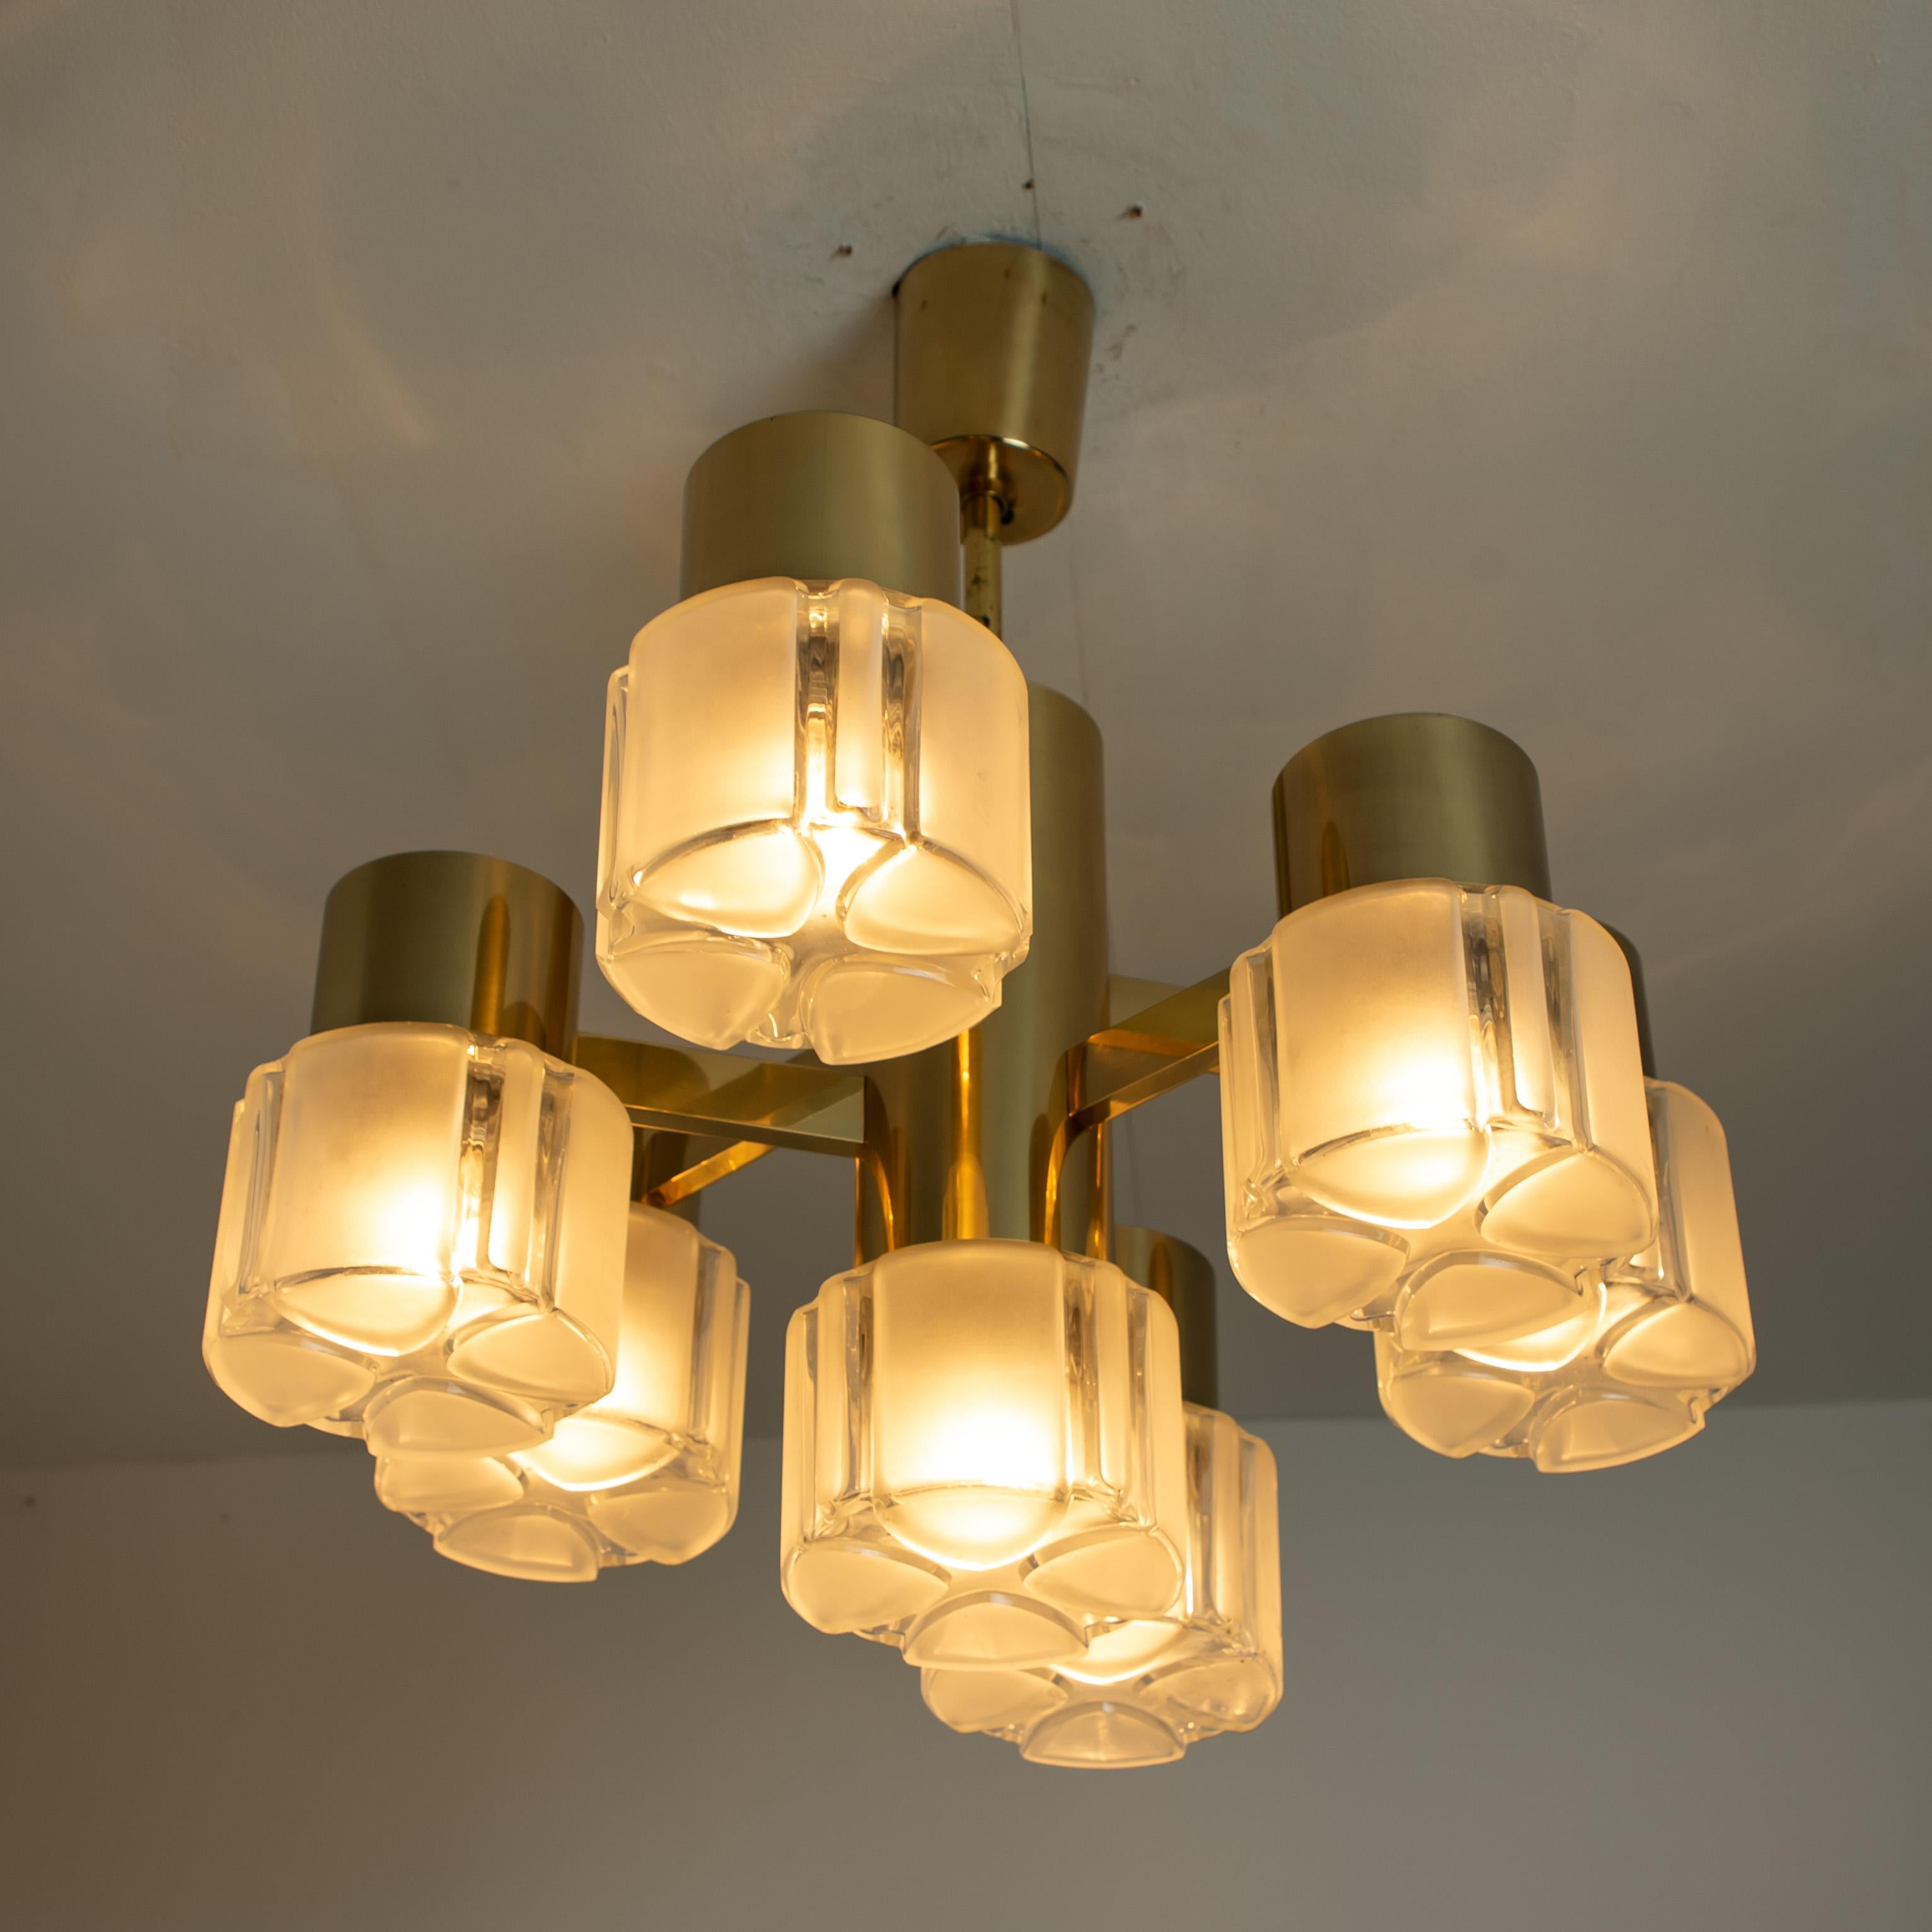 Hillebrand Chandelier Matt and Clear Glass Shades and Brass, circa 1970s Germany For Sale 7